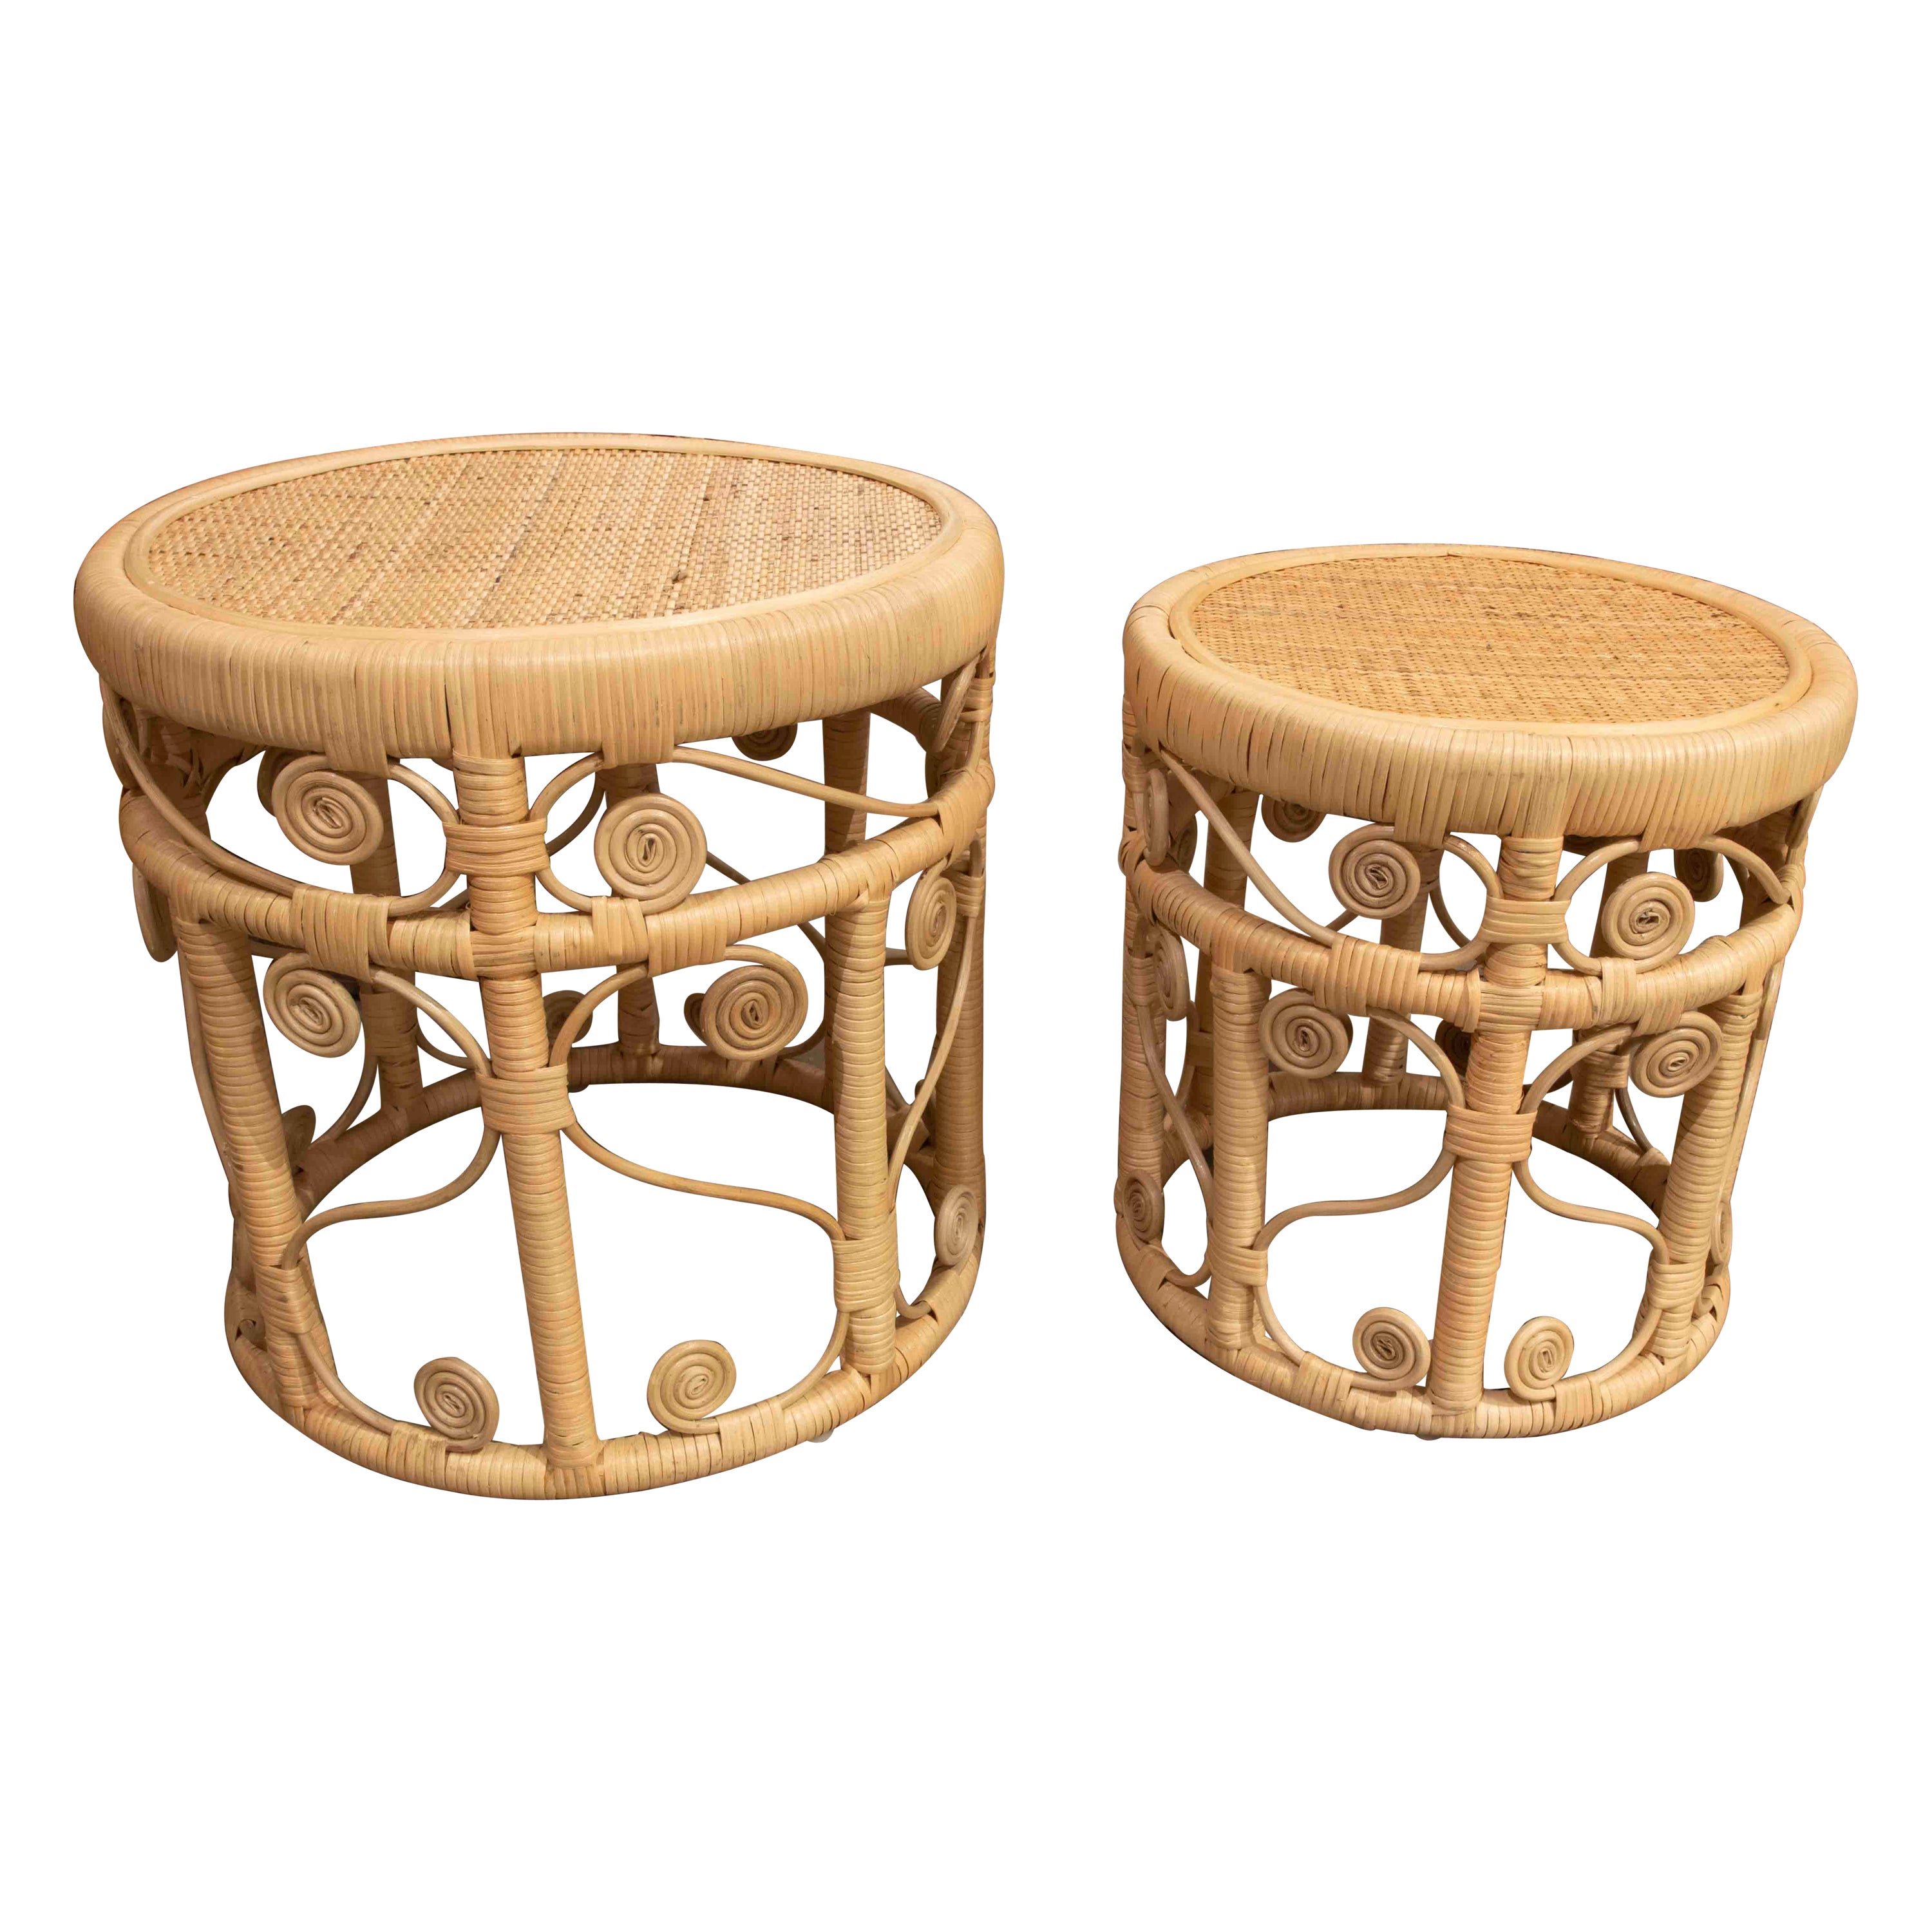 Pair of Handmade Rattan and Wicker Round Benches For Sale